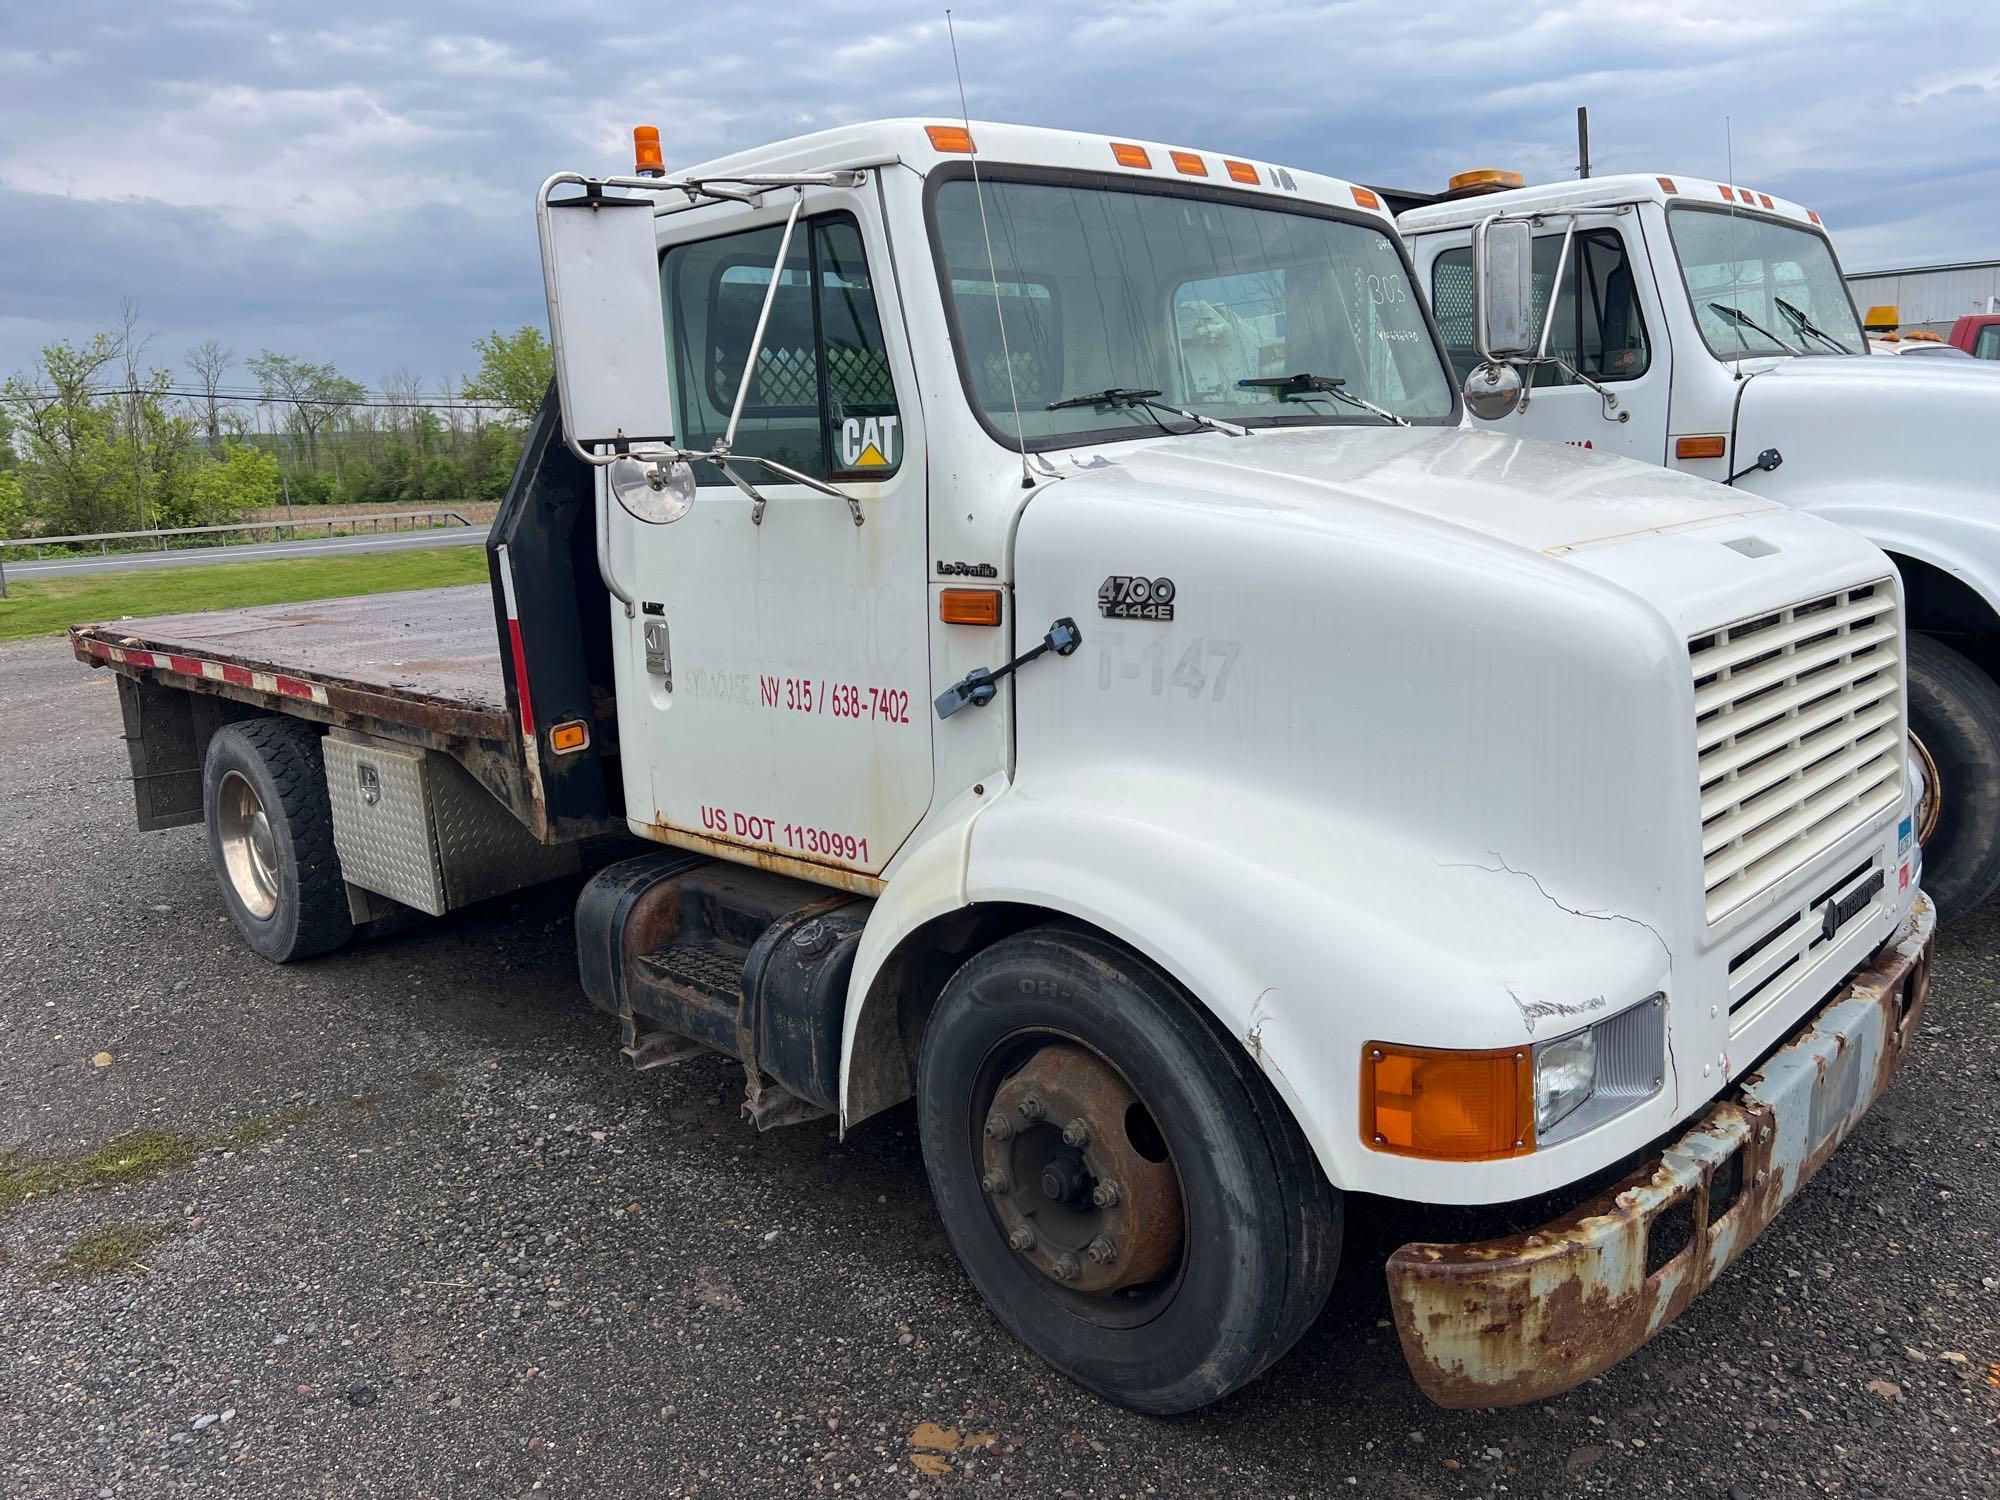 1999 INTERNATIONAL 4700 FLATBED TRUCK VN:1HTSMABM3XH646490 powered by T444E diesel engine, equipped